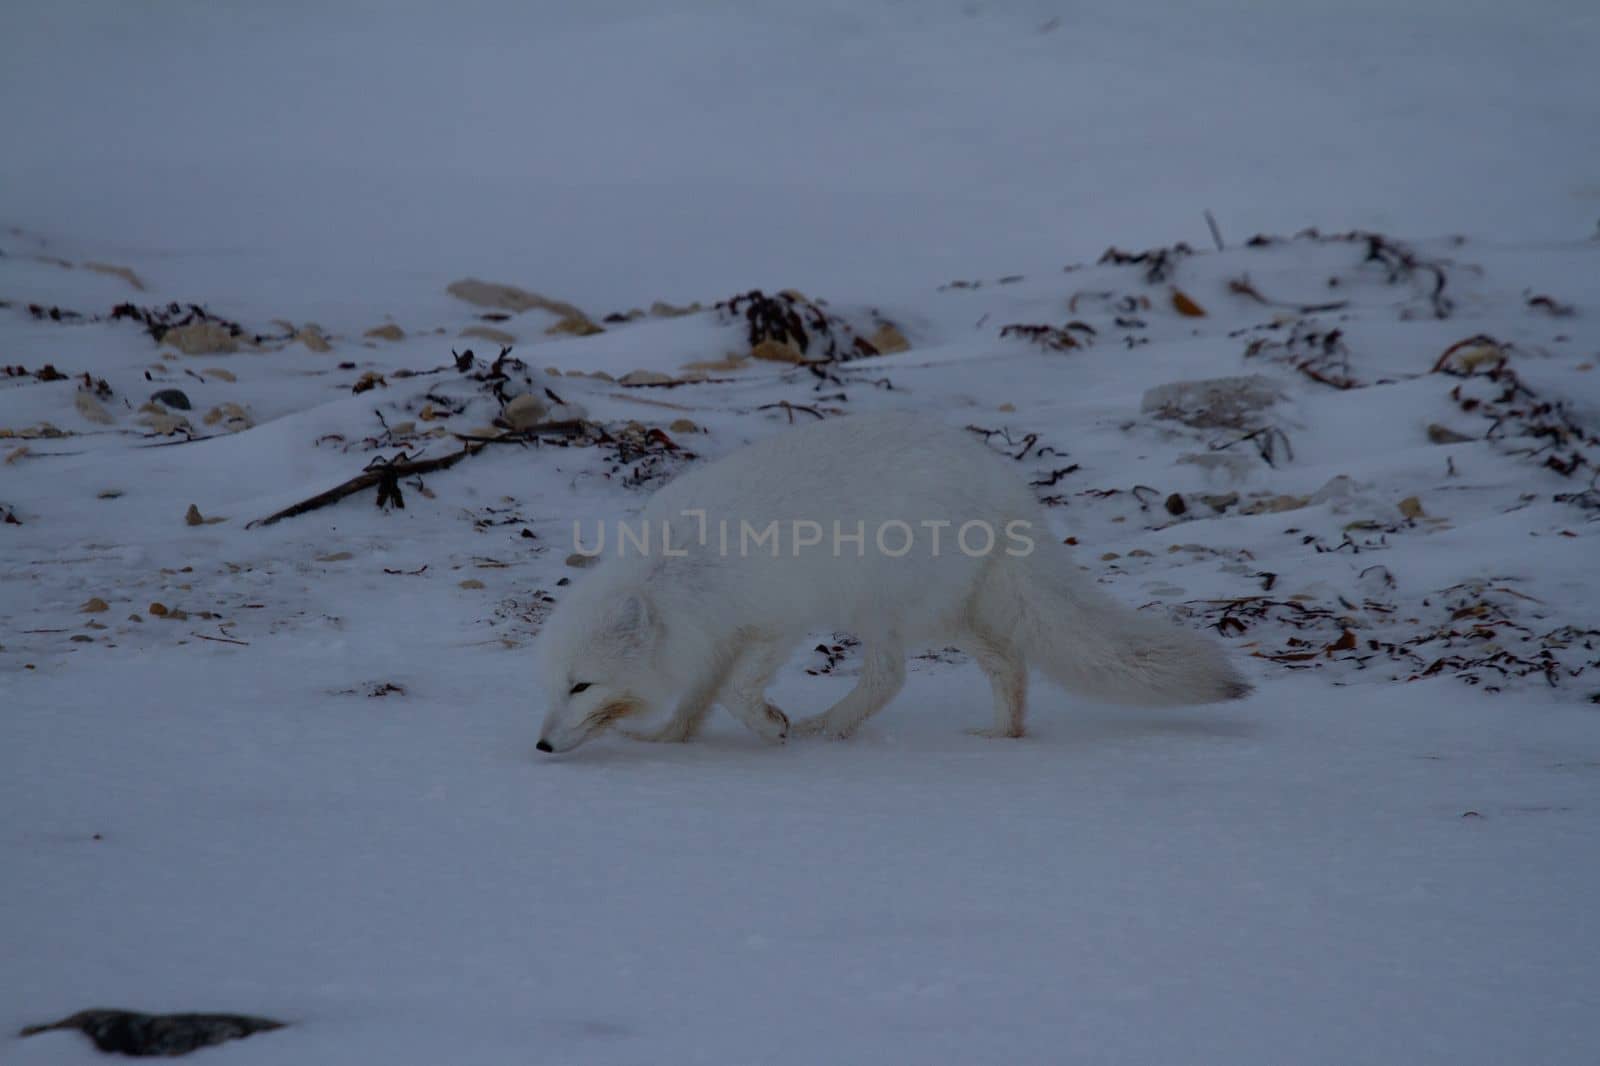 Arctic fox or Vulpes Lagopus sniffing the ground in a snowy scene by Granchinho